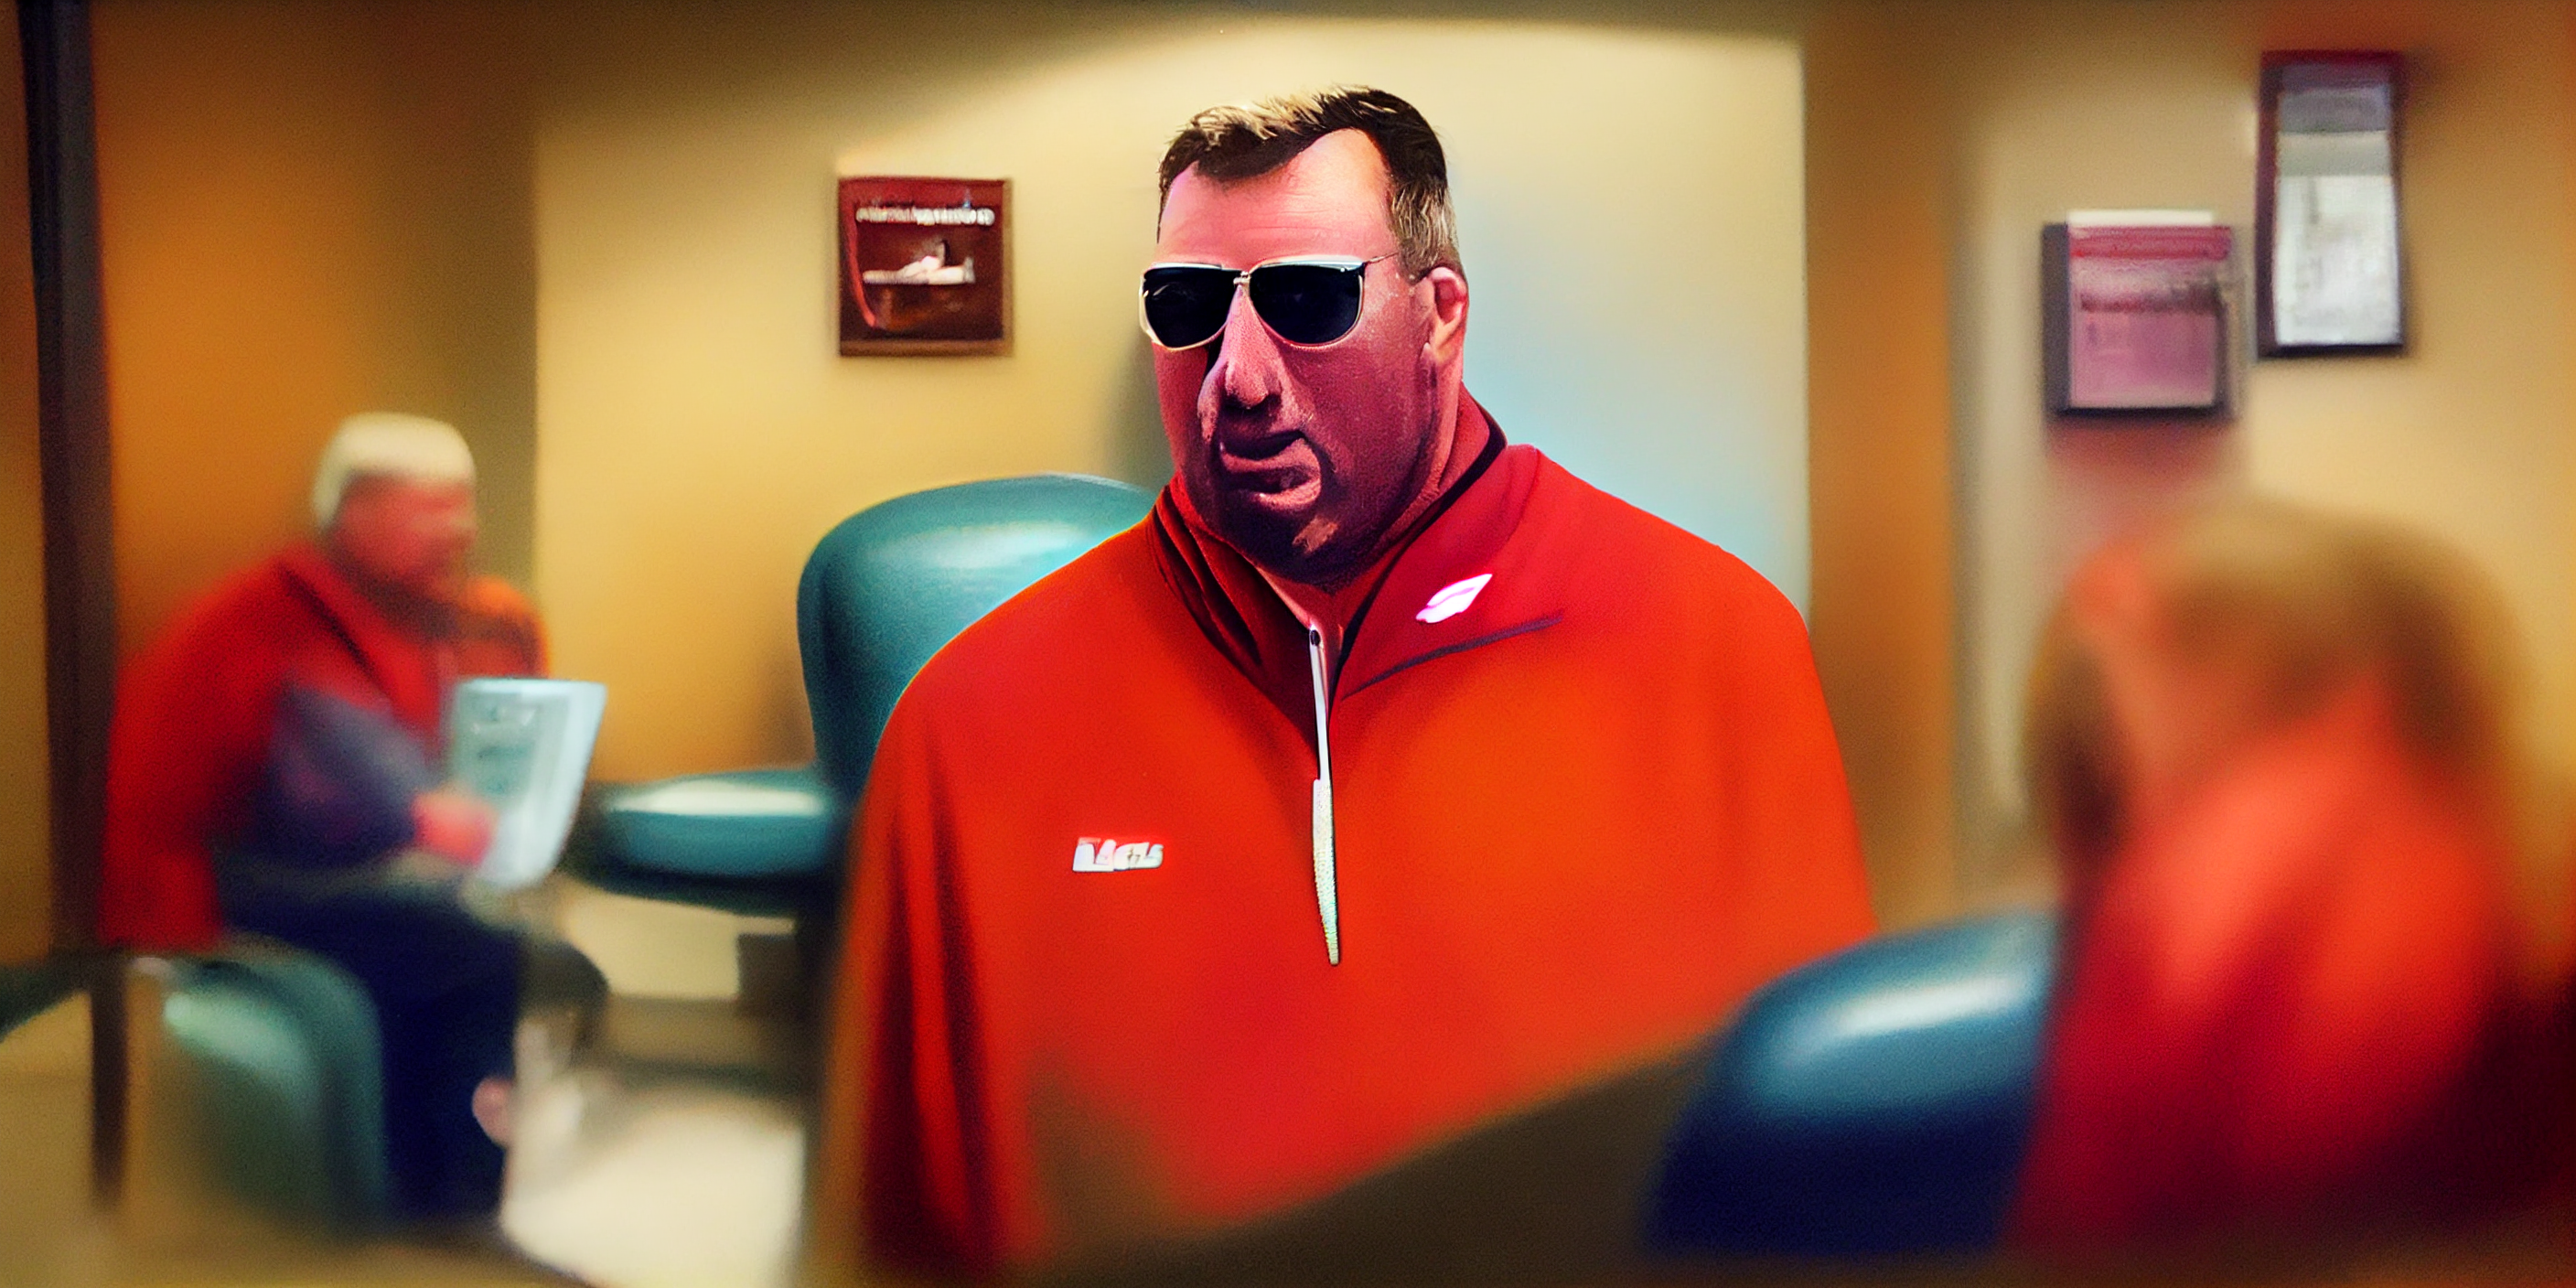 Michigan vs. Illinois Preview: Bielema’s Bunch Is Banged Up